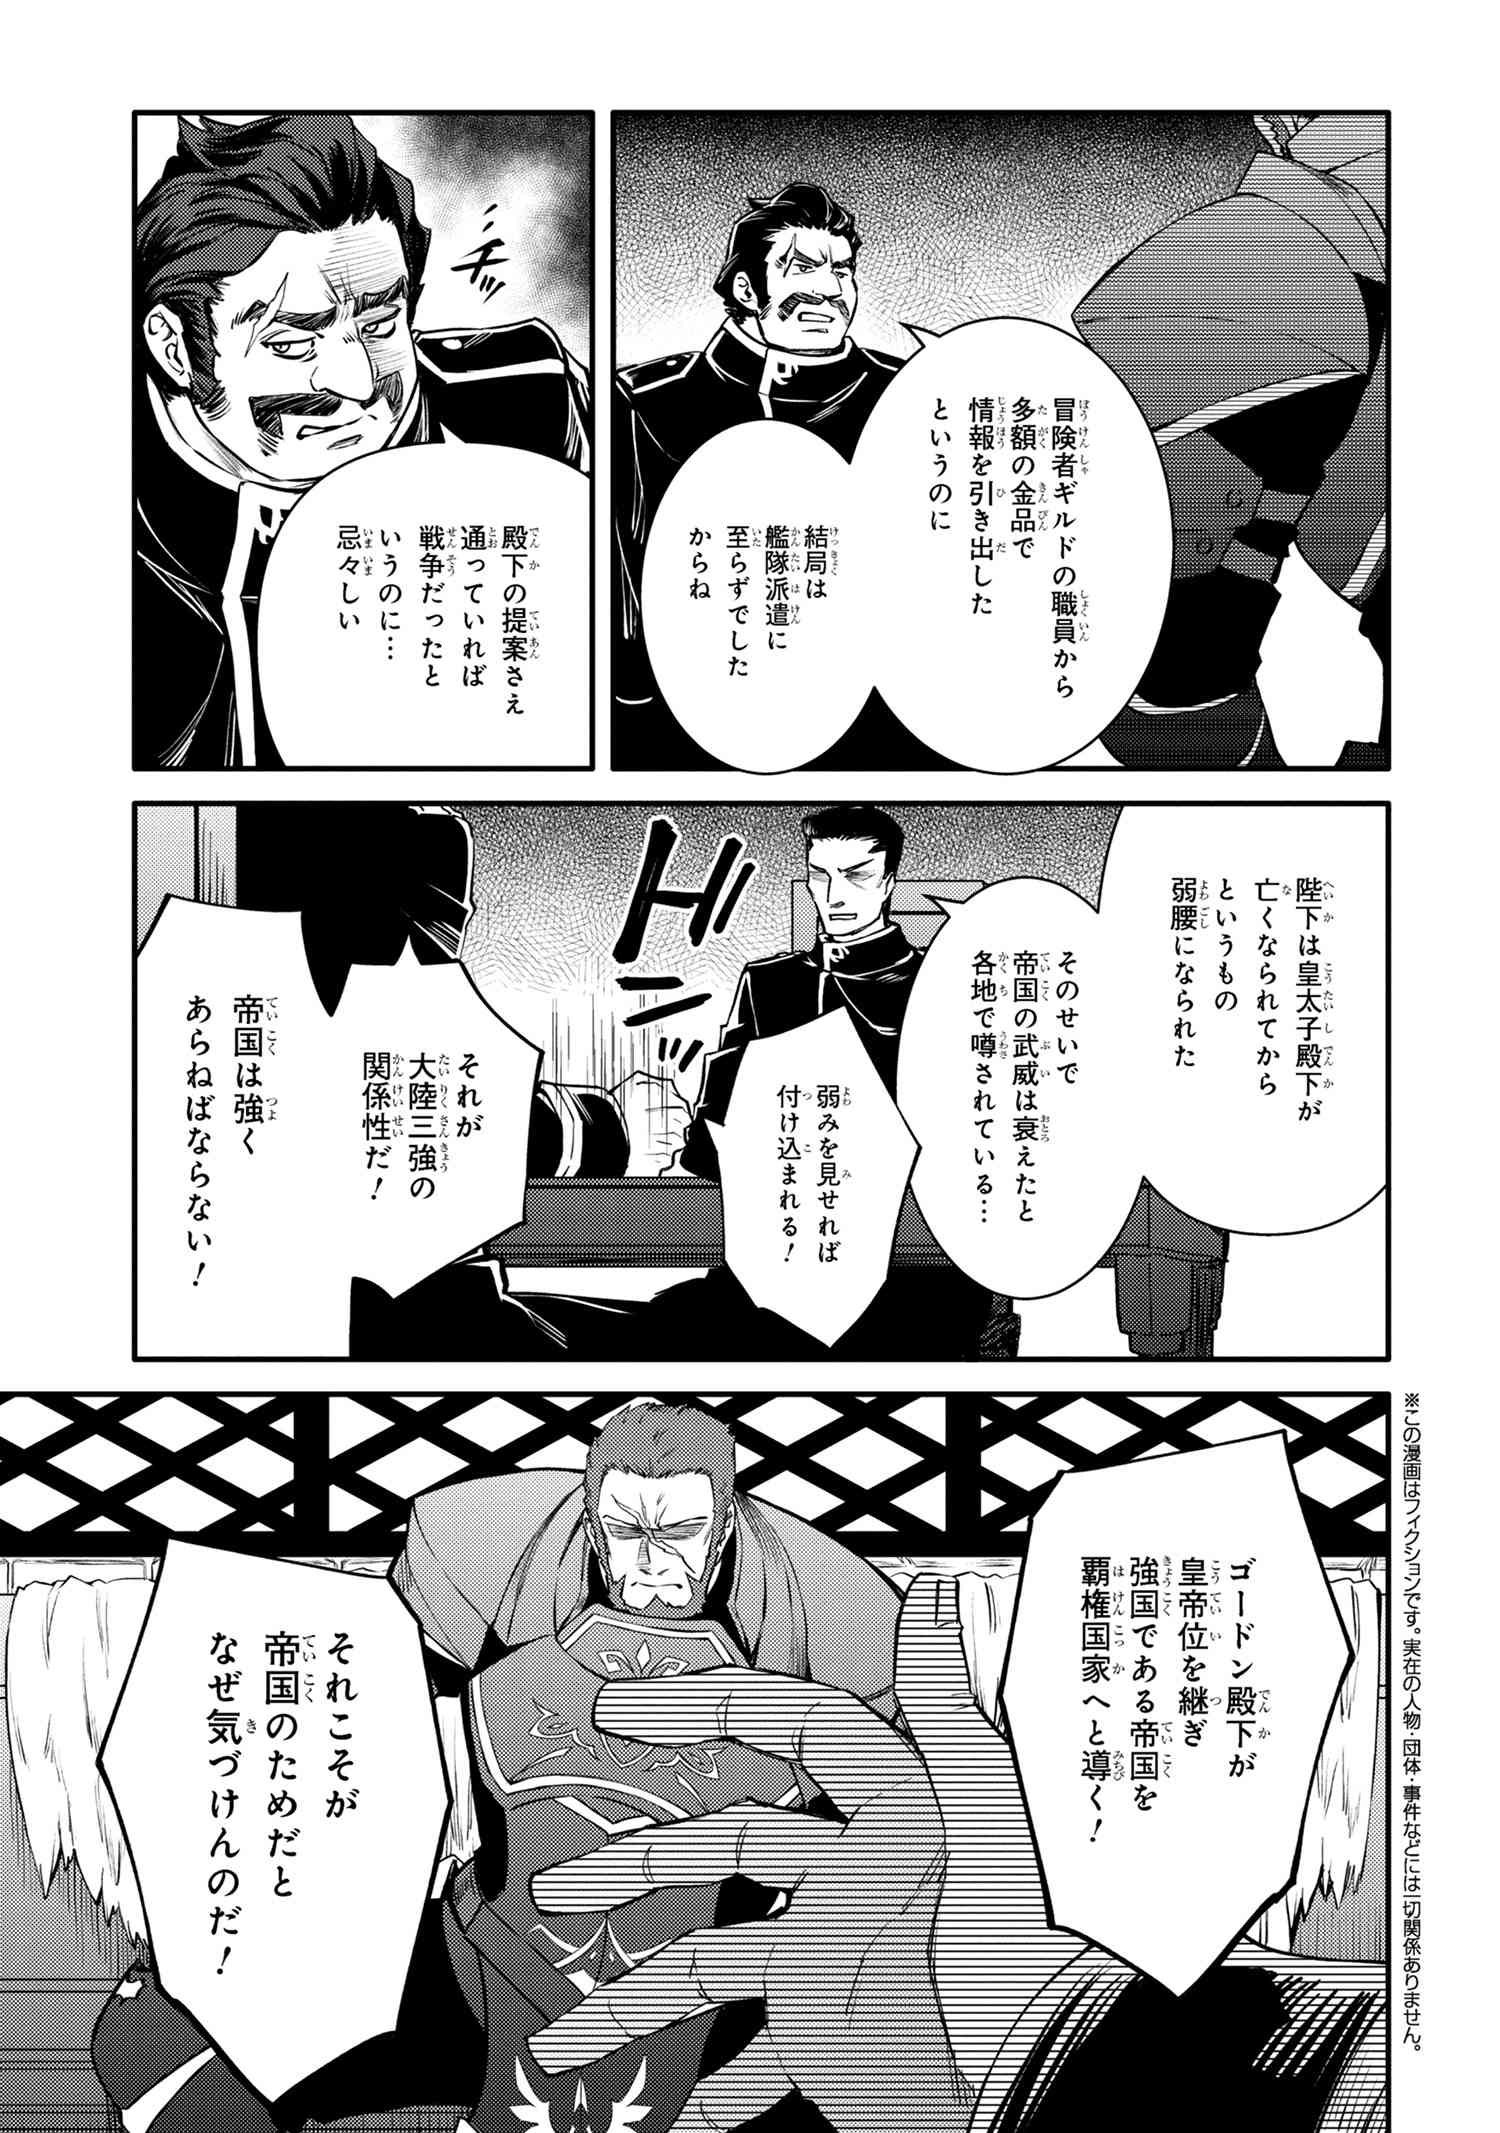 The Strongest Dull Prince’s Secret Battle for the Throne - Chapter 38.2 - Page 2